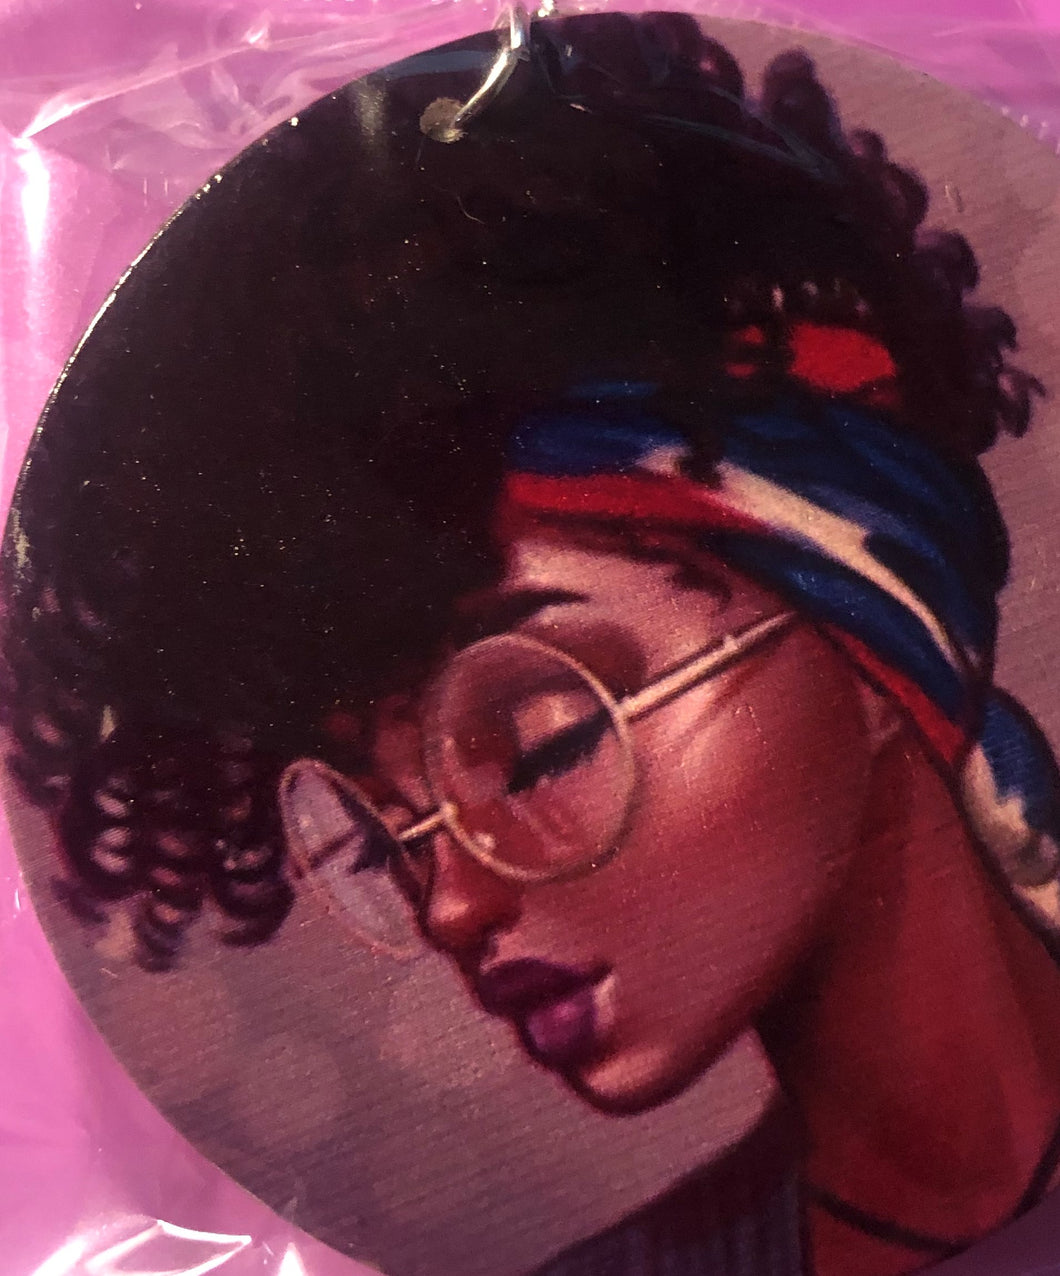 #6 African Women earrings(with glasses)